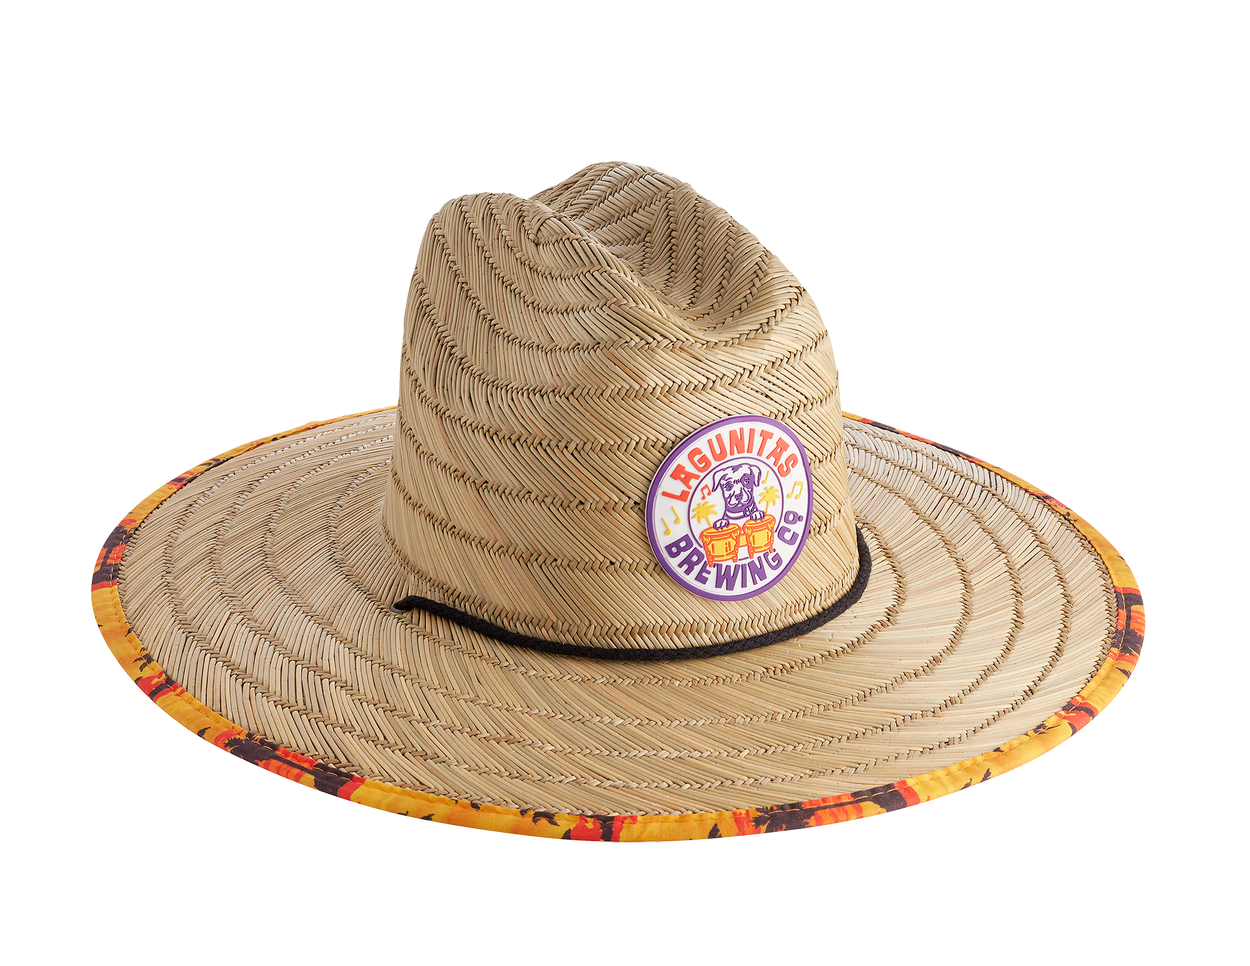 A close-up view of the Lagunitas Island Beats Sun Hat is shown. The hat features a wide brim, providing ample shade to the wearer. The hat's lightweight design makes it comfortable to wear even on hot days. 